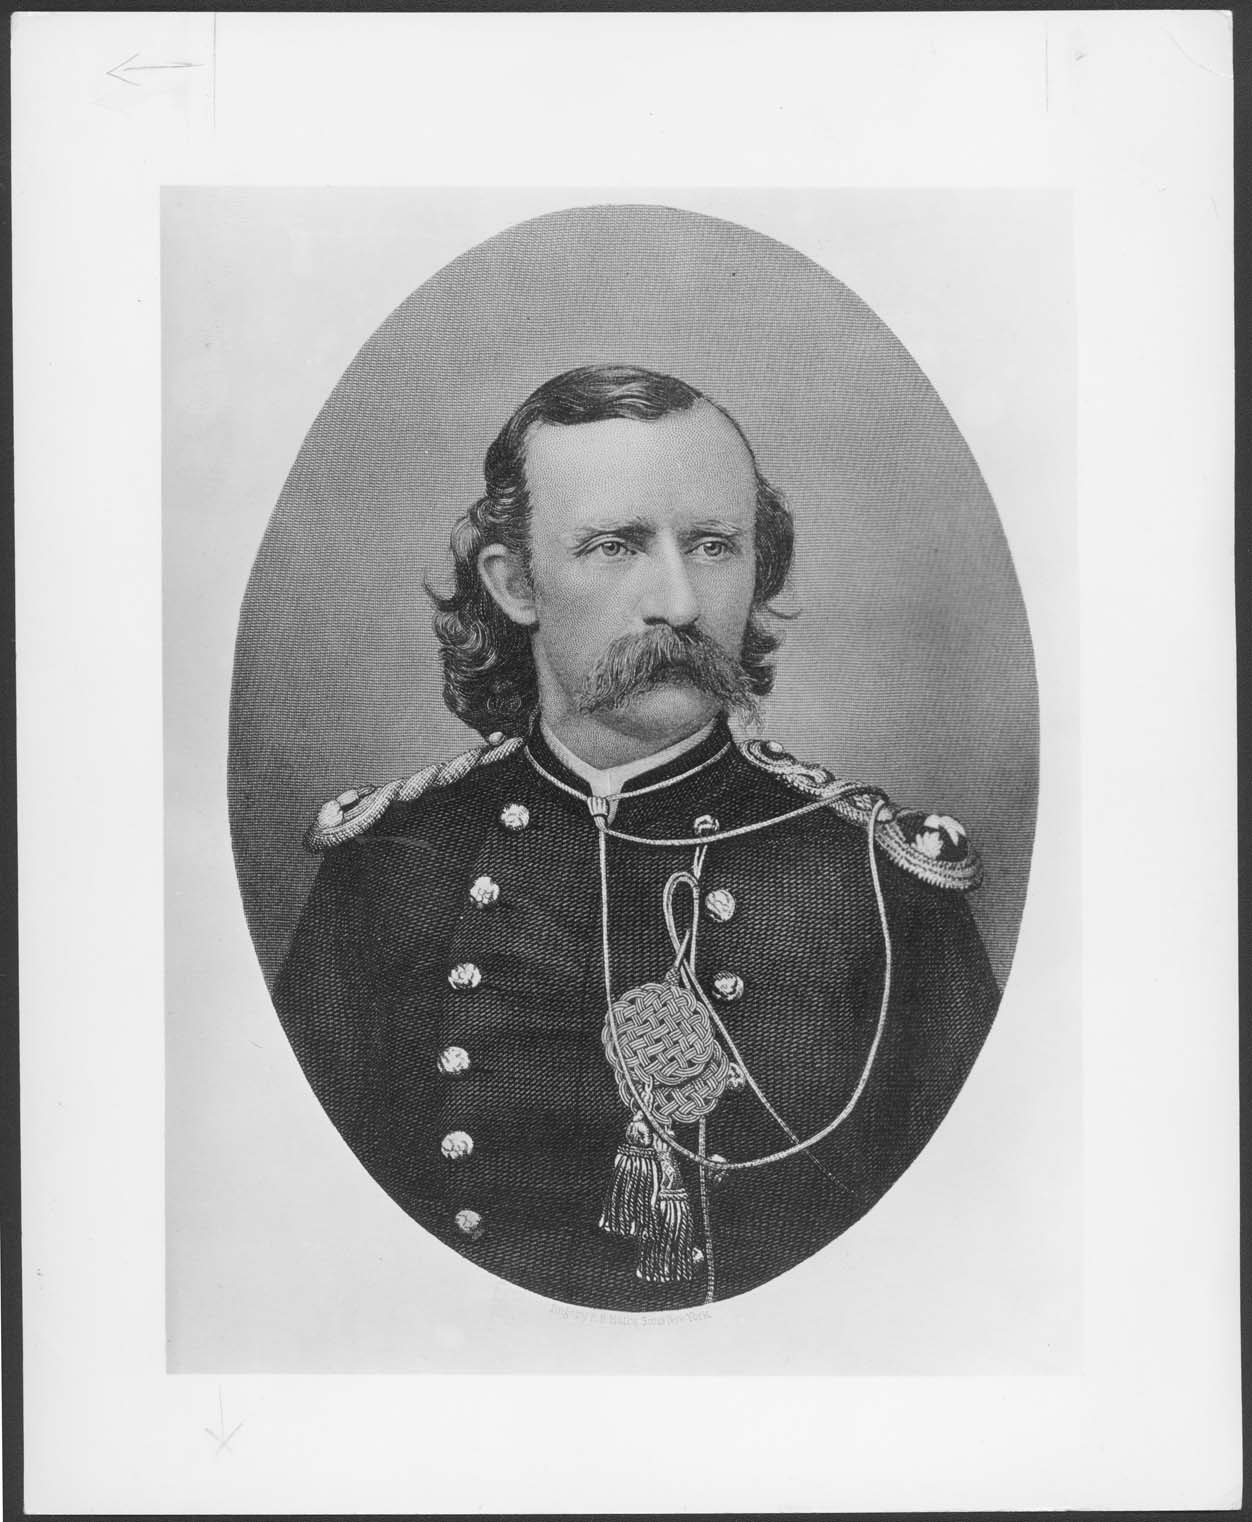 Engraving of Bvt Major General George Armstrong Custer.